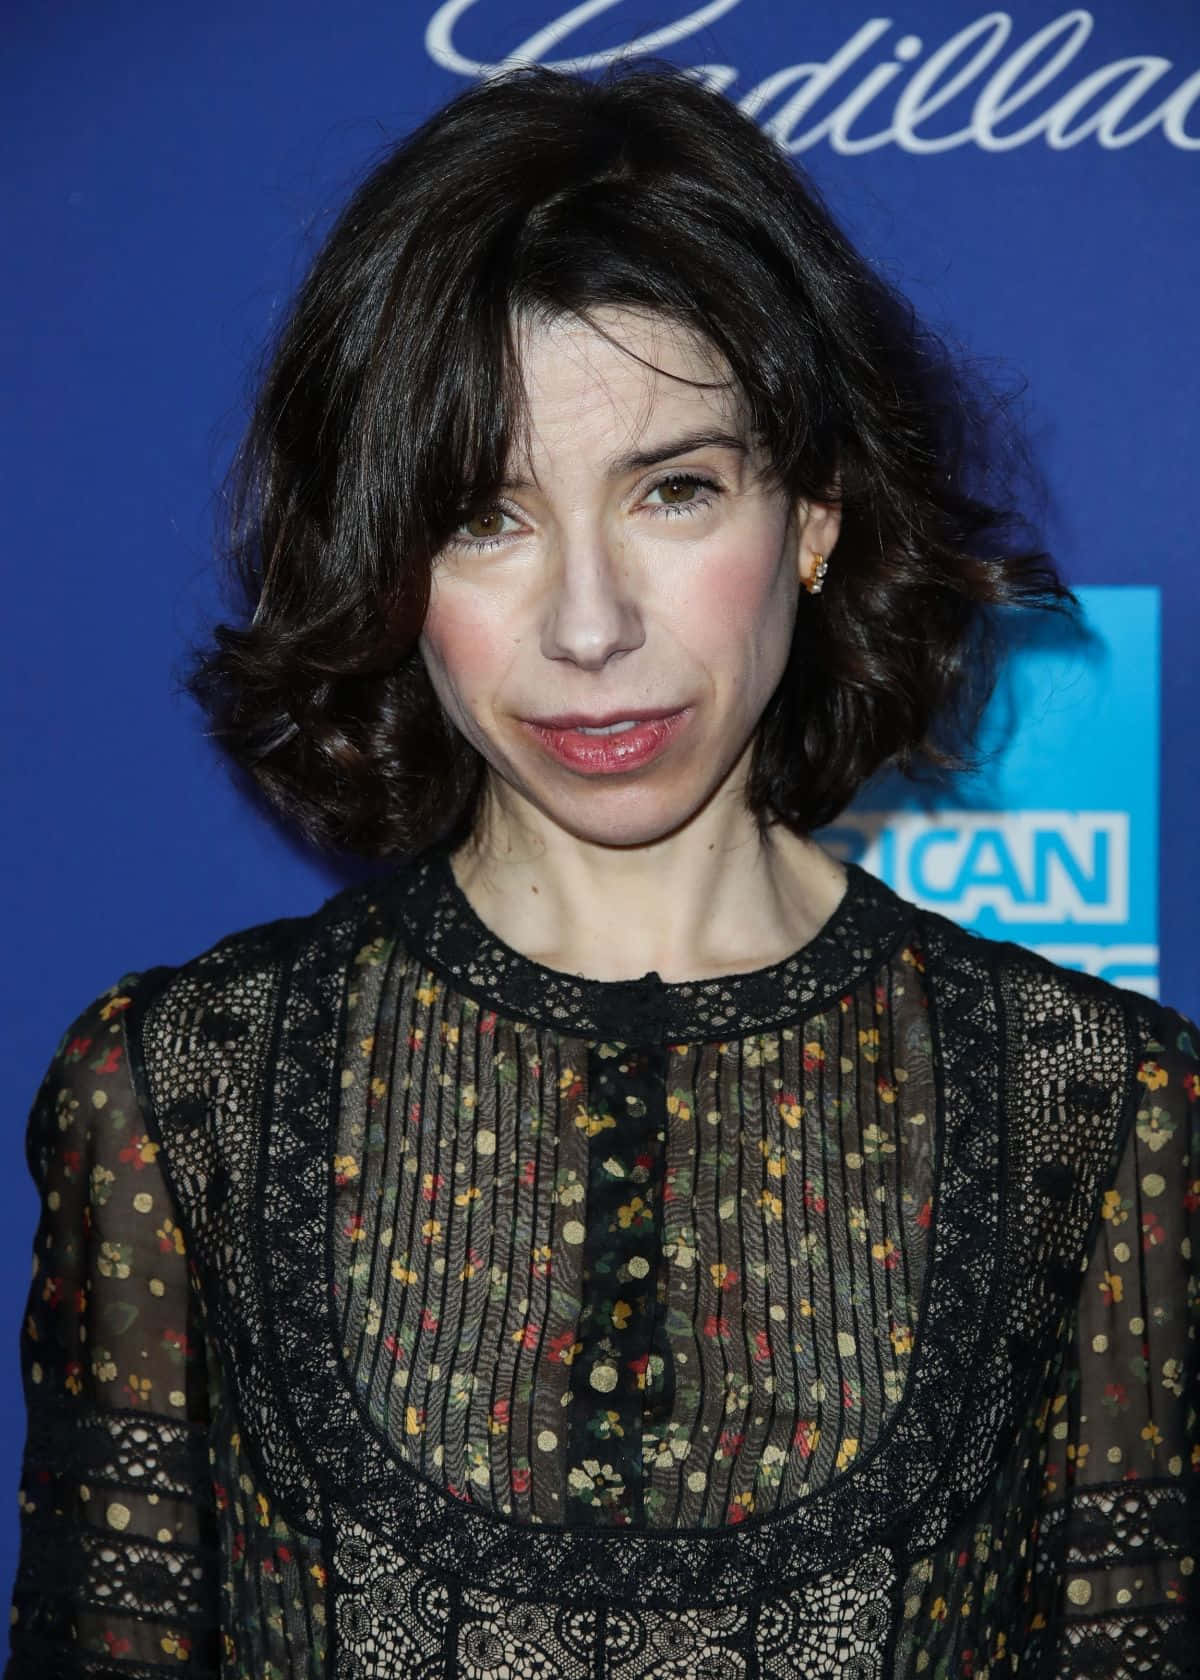 Oscar-nominated Actress Sally Hawkins On The Red Carpet. Wallpaper